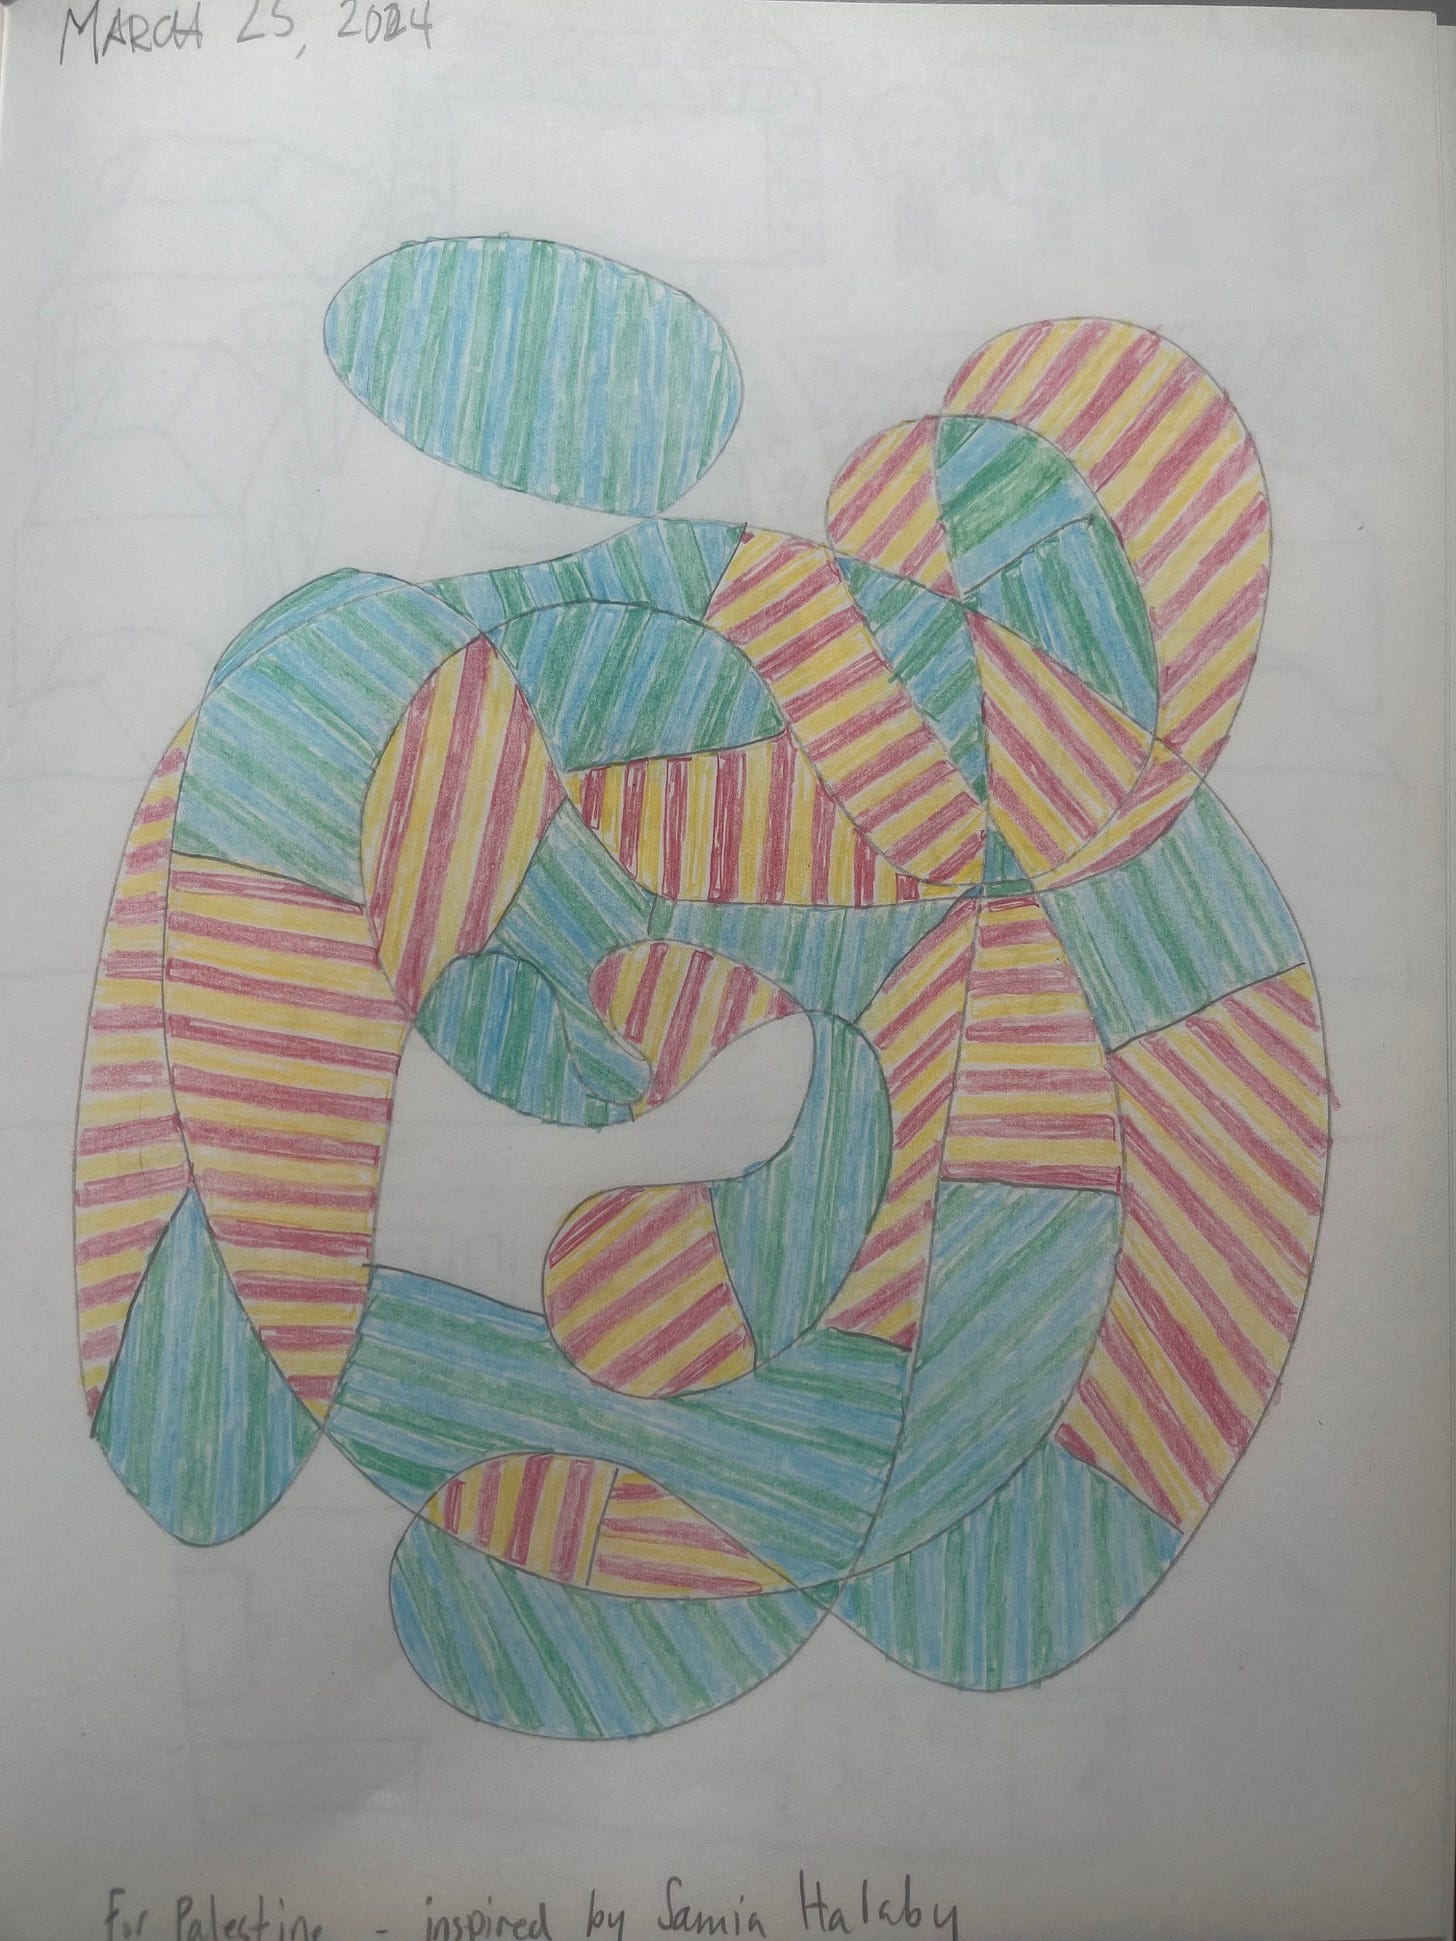 A drawing of swirls crossed with lines, and filled in with alternating colored stripes, some red/yellow and others blue/green.